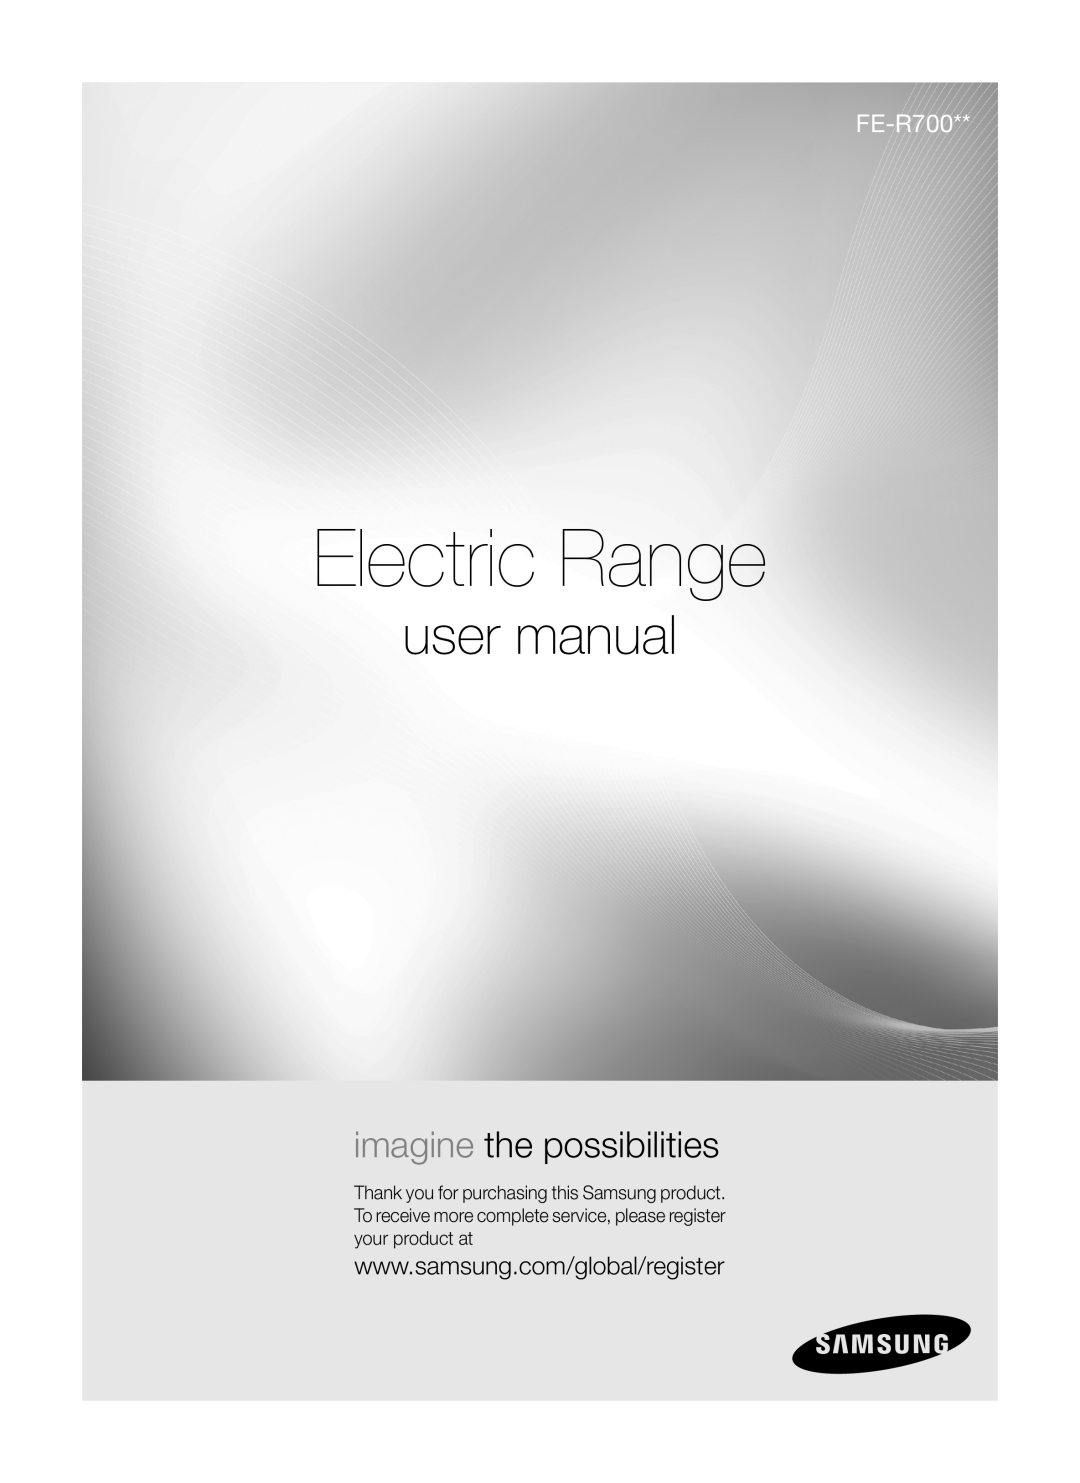 Samsung FE-R700WX, DG68-00294A user manual Electric Range, imagine the possibilities 